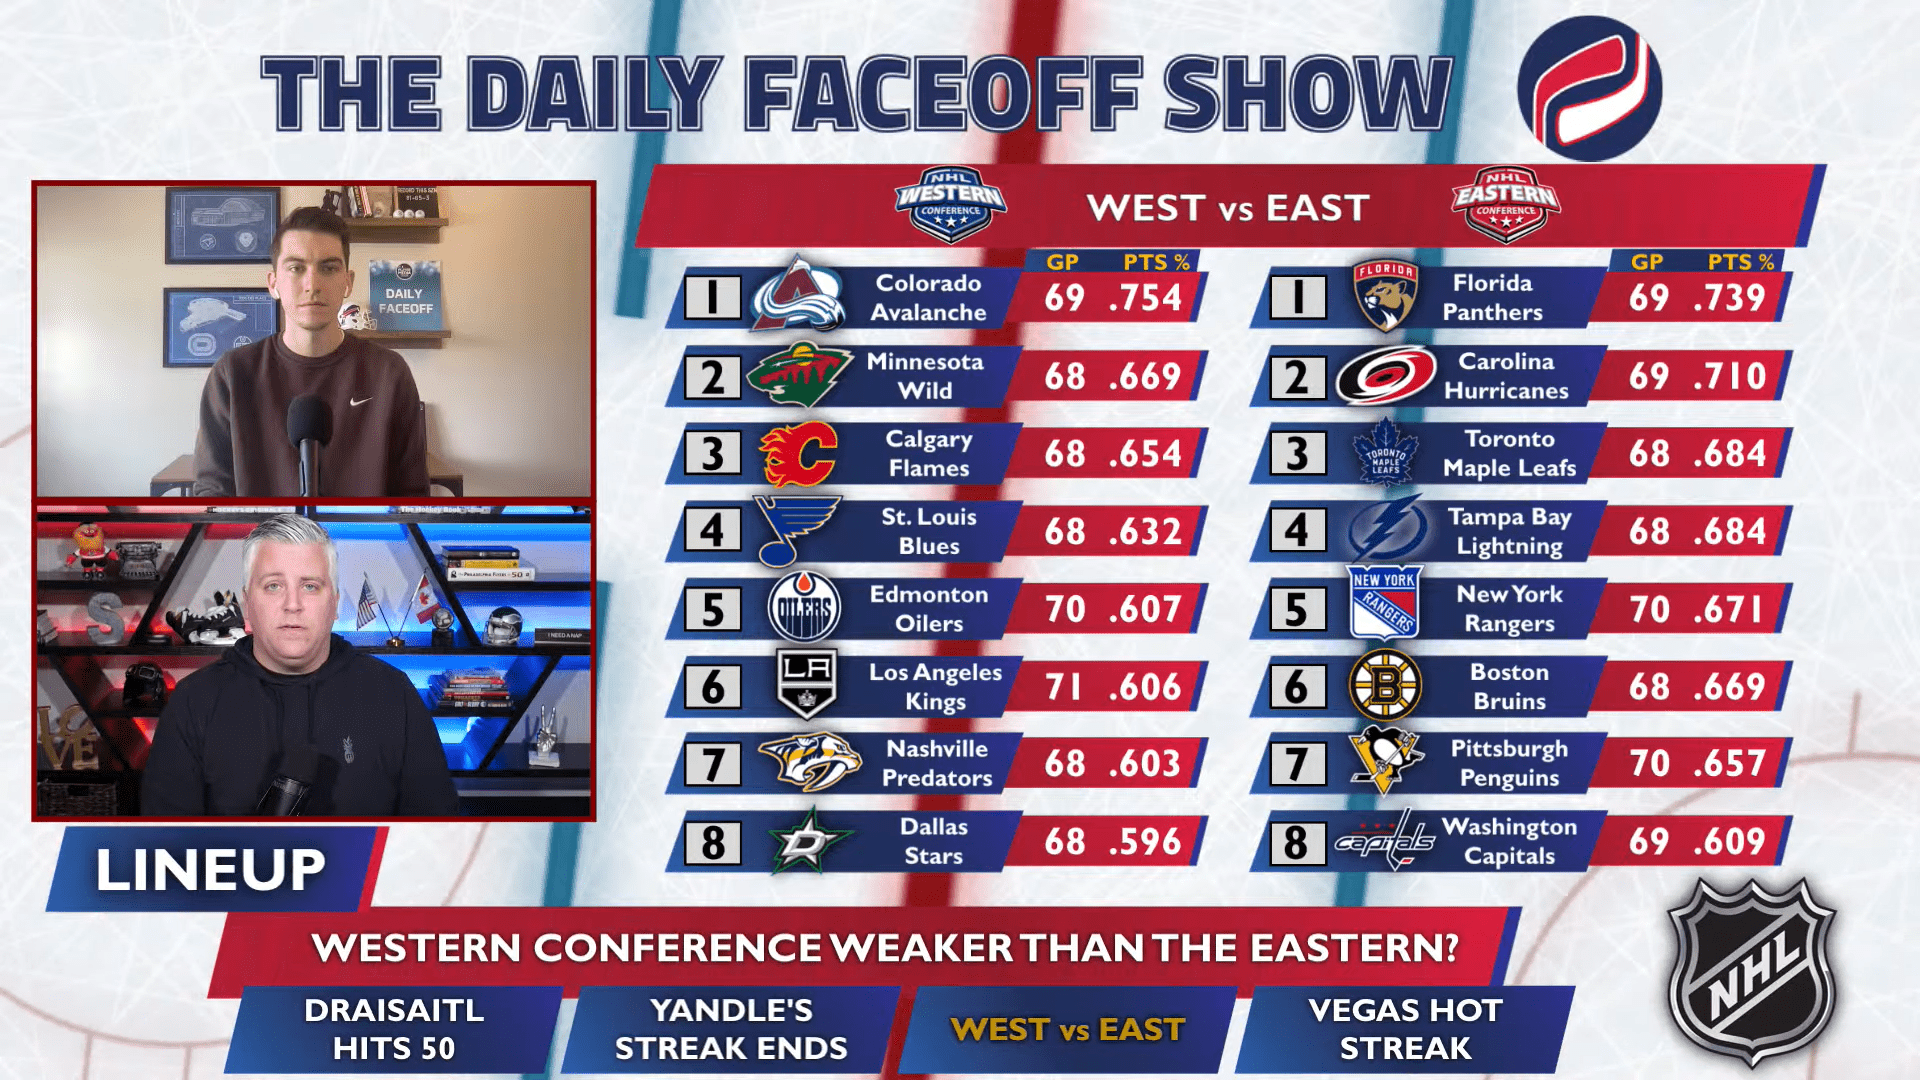 The Daily Faceoff Show: Is the East or West the better conference?